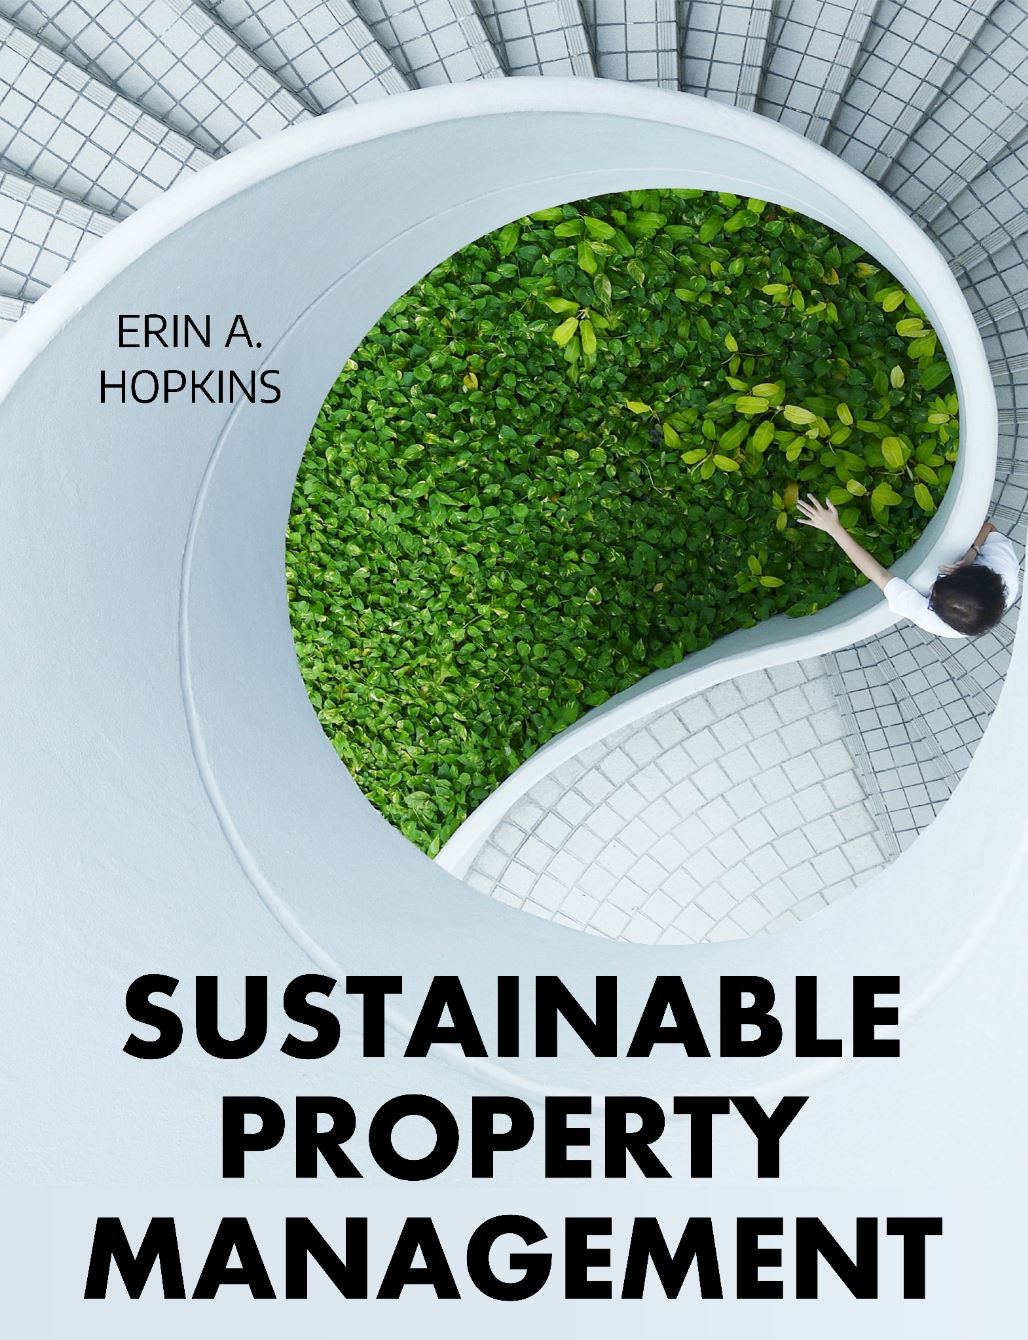 Read more about Sustainable Property Management